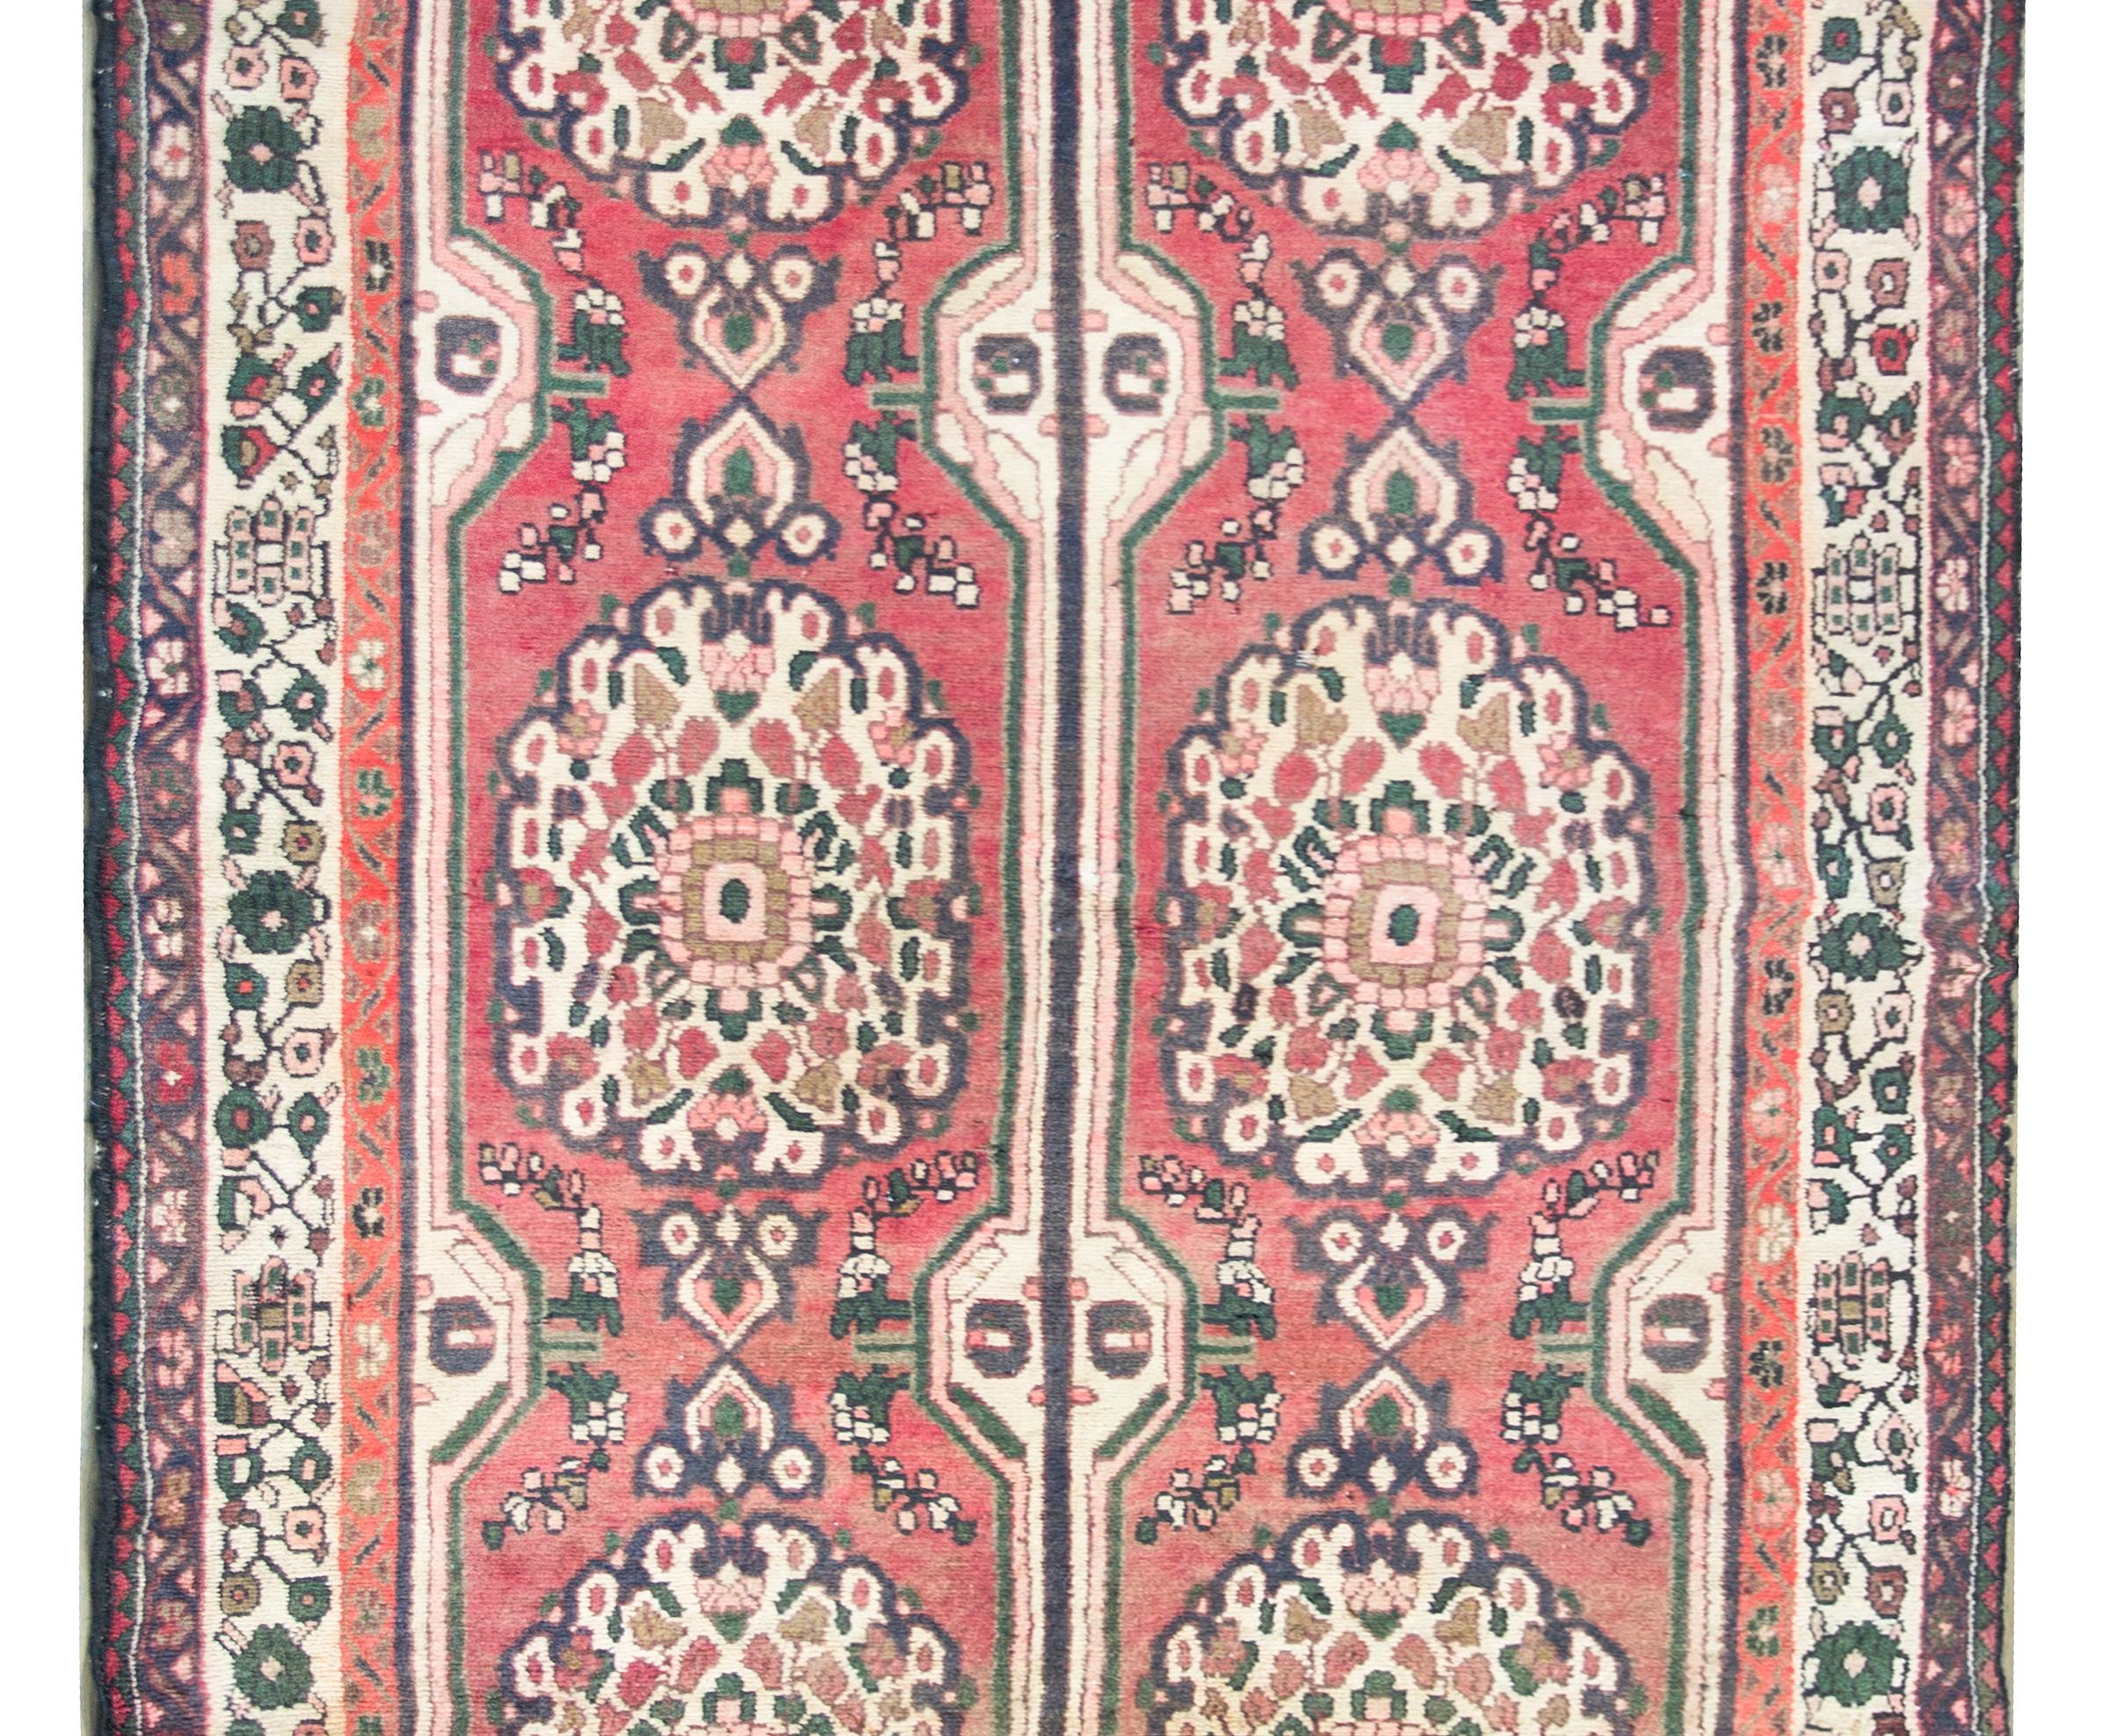 A wonderful mid-20th century Persian Hamadan rug with six large floral medallions living amidst a field of more flowers, and all woven crimson, beige, white, and pink wool. The border is complex with three distinct floral patterned stripes woven in